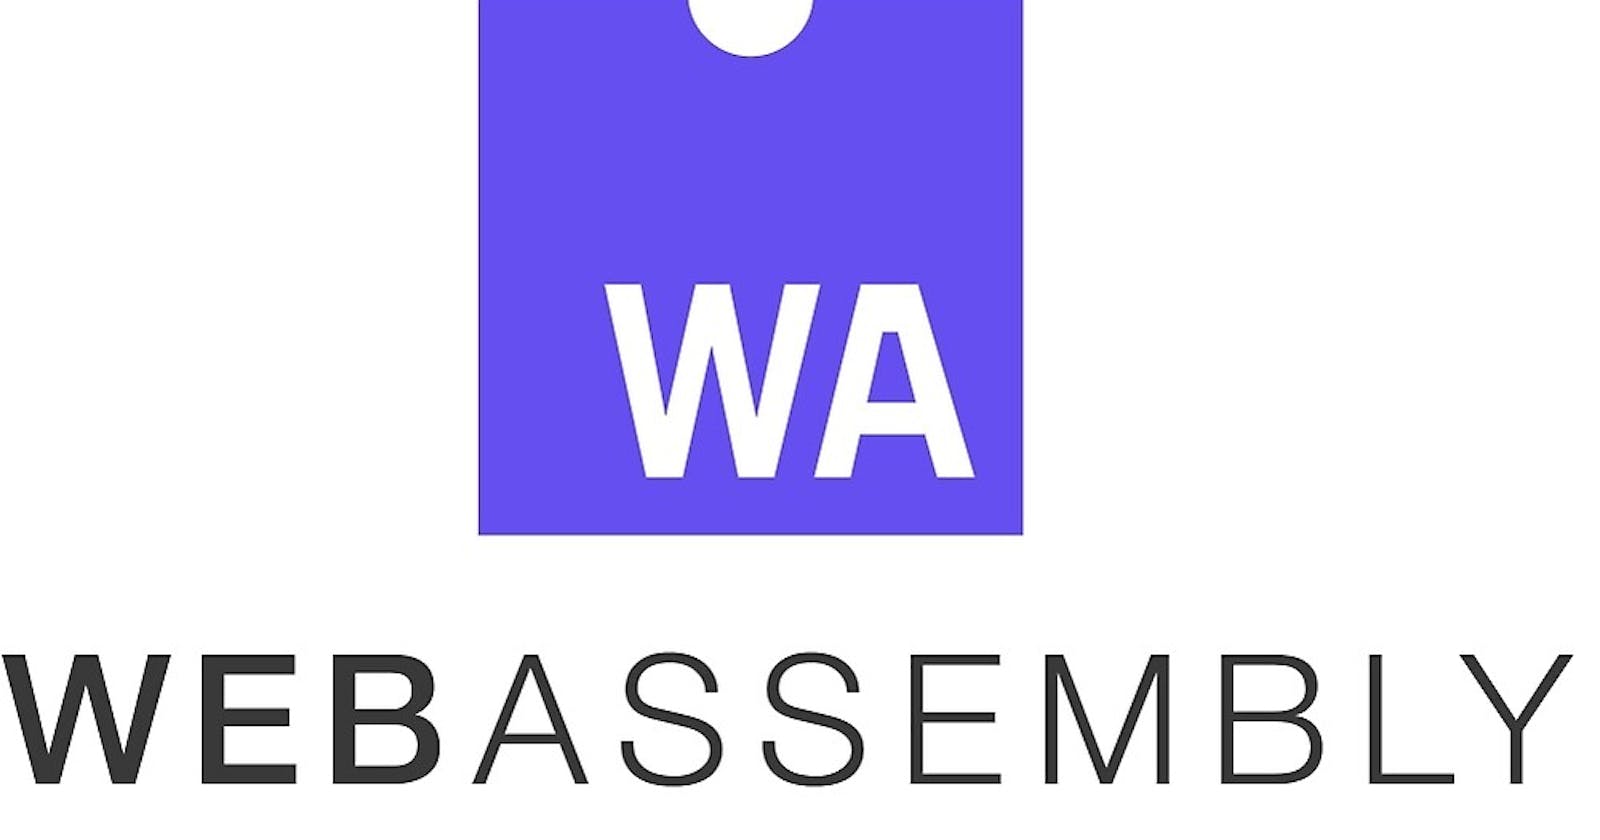 Introduction to WebAssembly [old article]